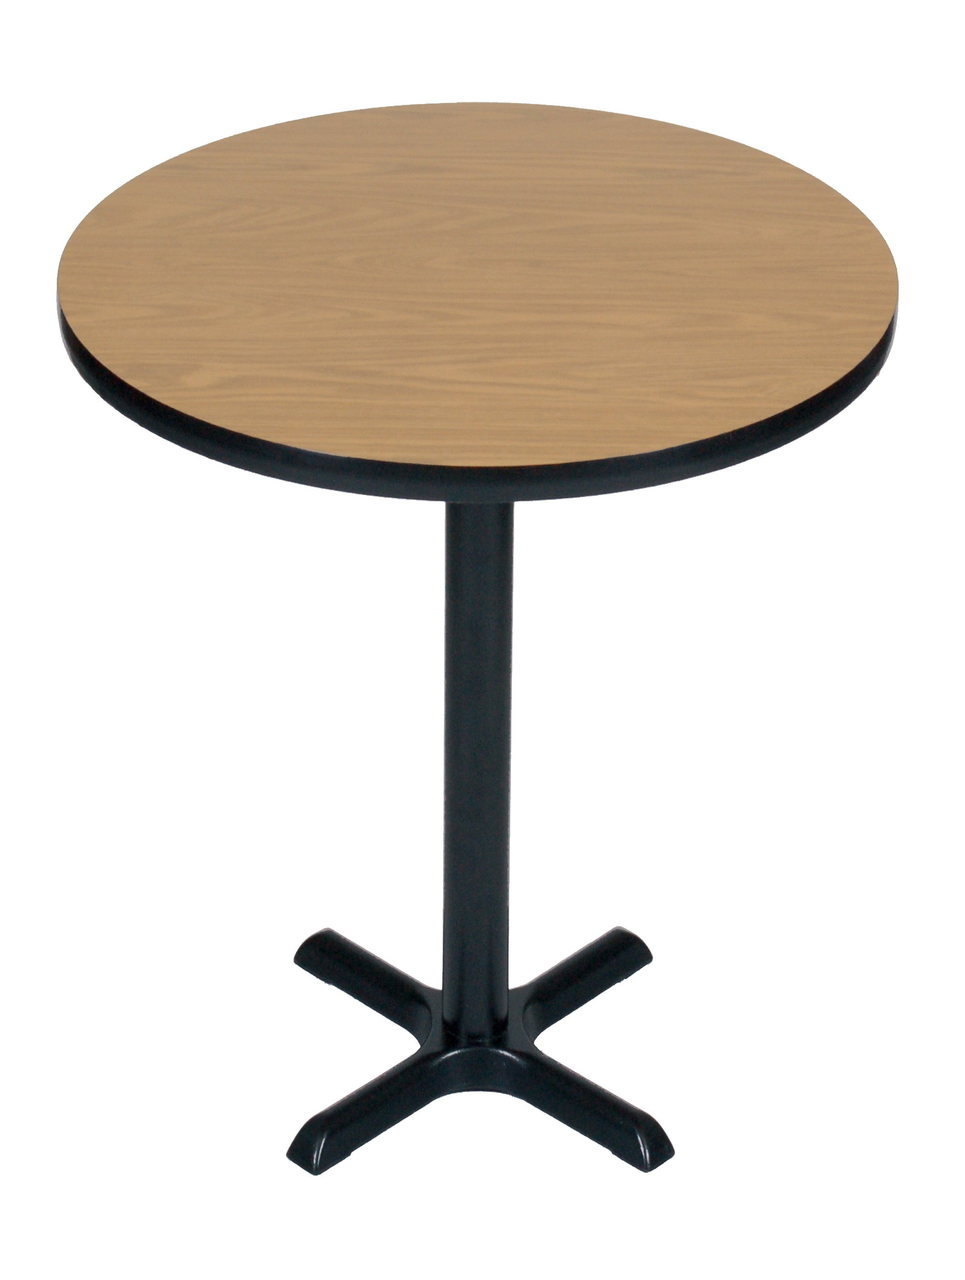 Bxb36R-01 Cafe and Breakroom Tables - Round Bar Stool-Standing Height - Walnut